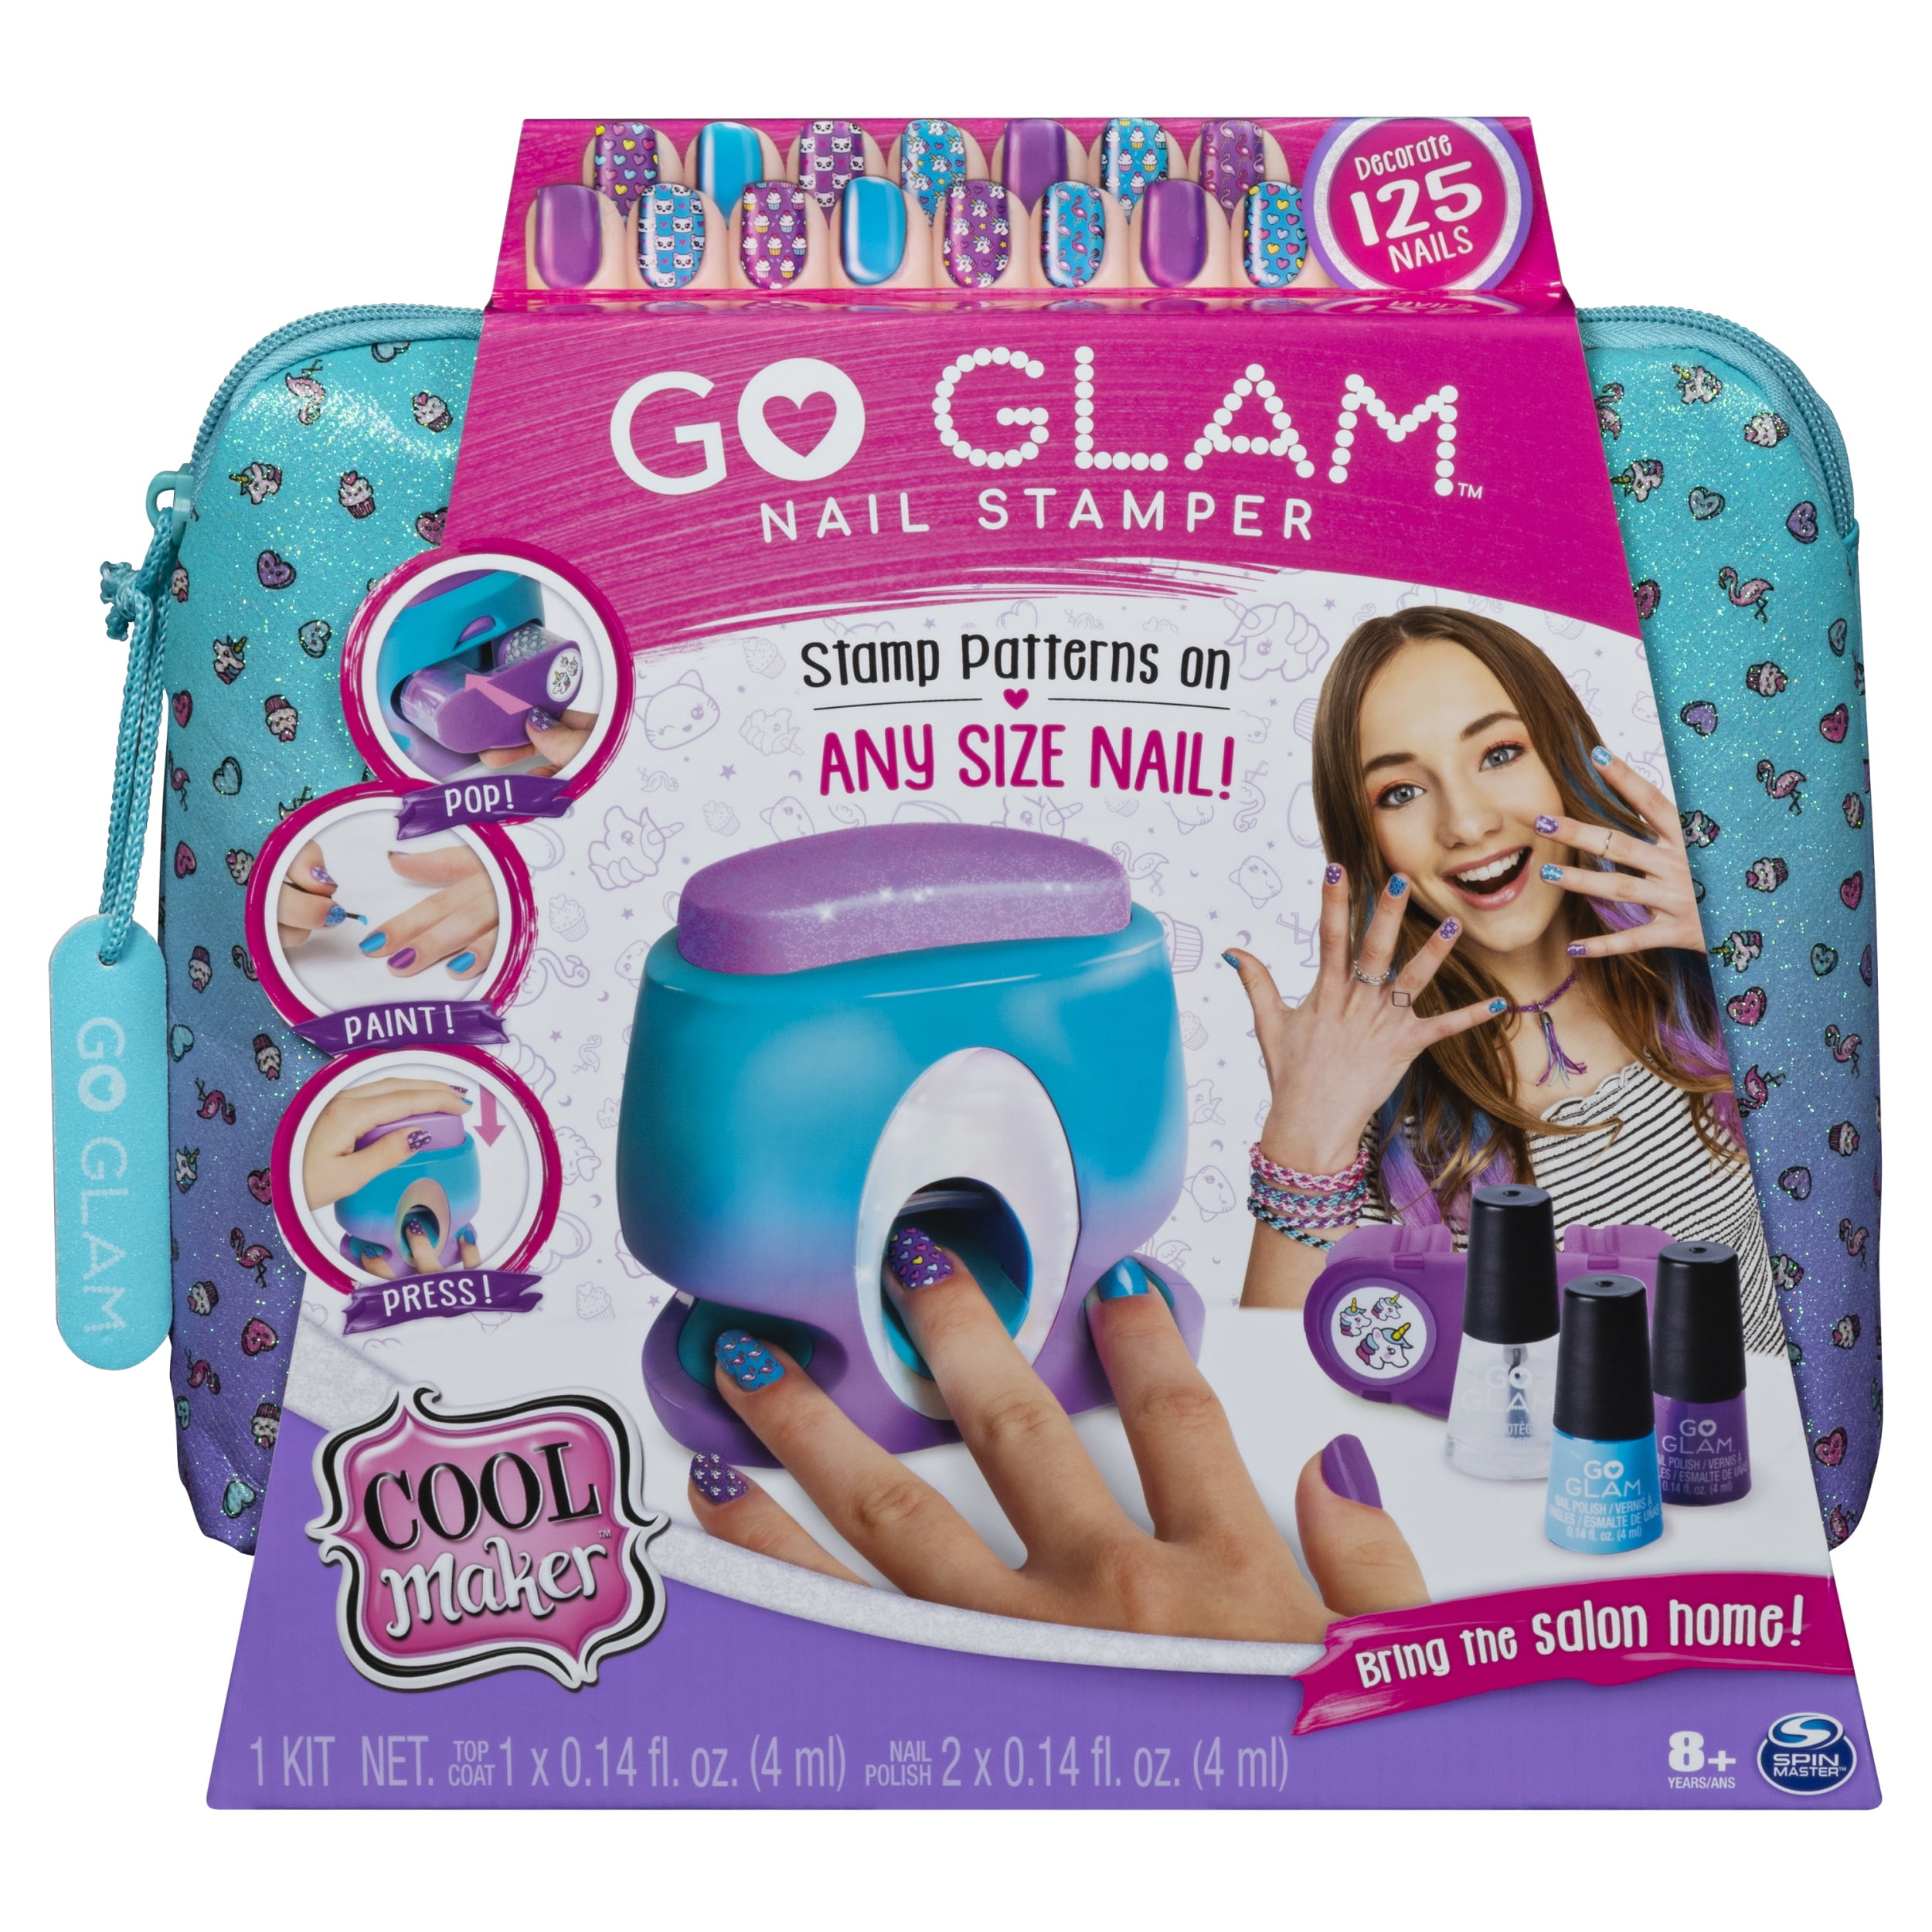 Cool Maker Go Glam Nail Stamper Nail Studio With 5 Patterns To